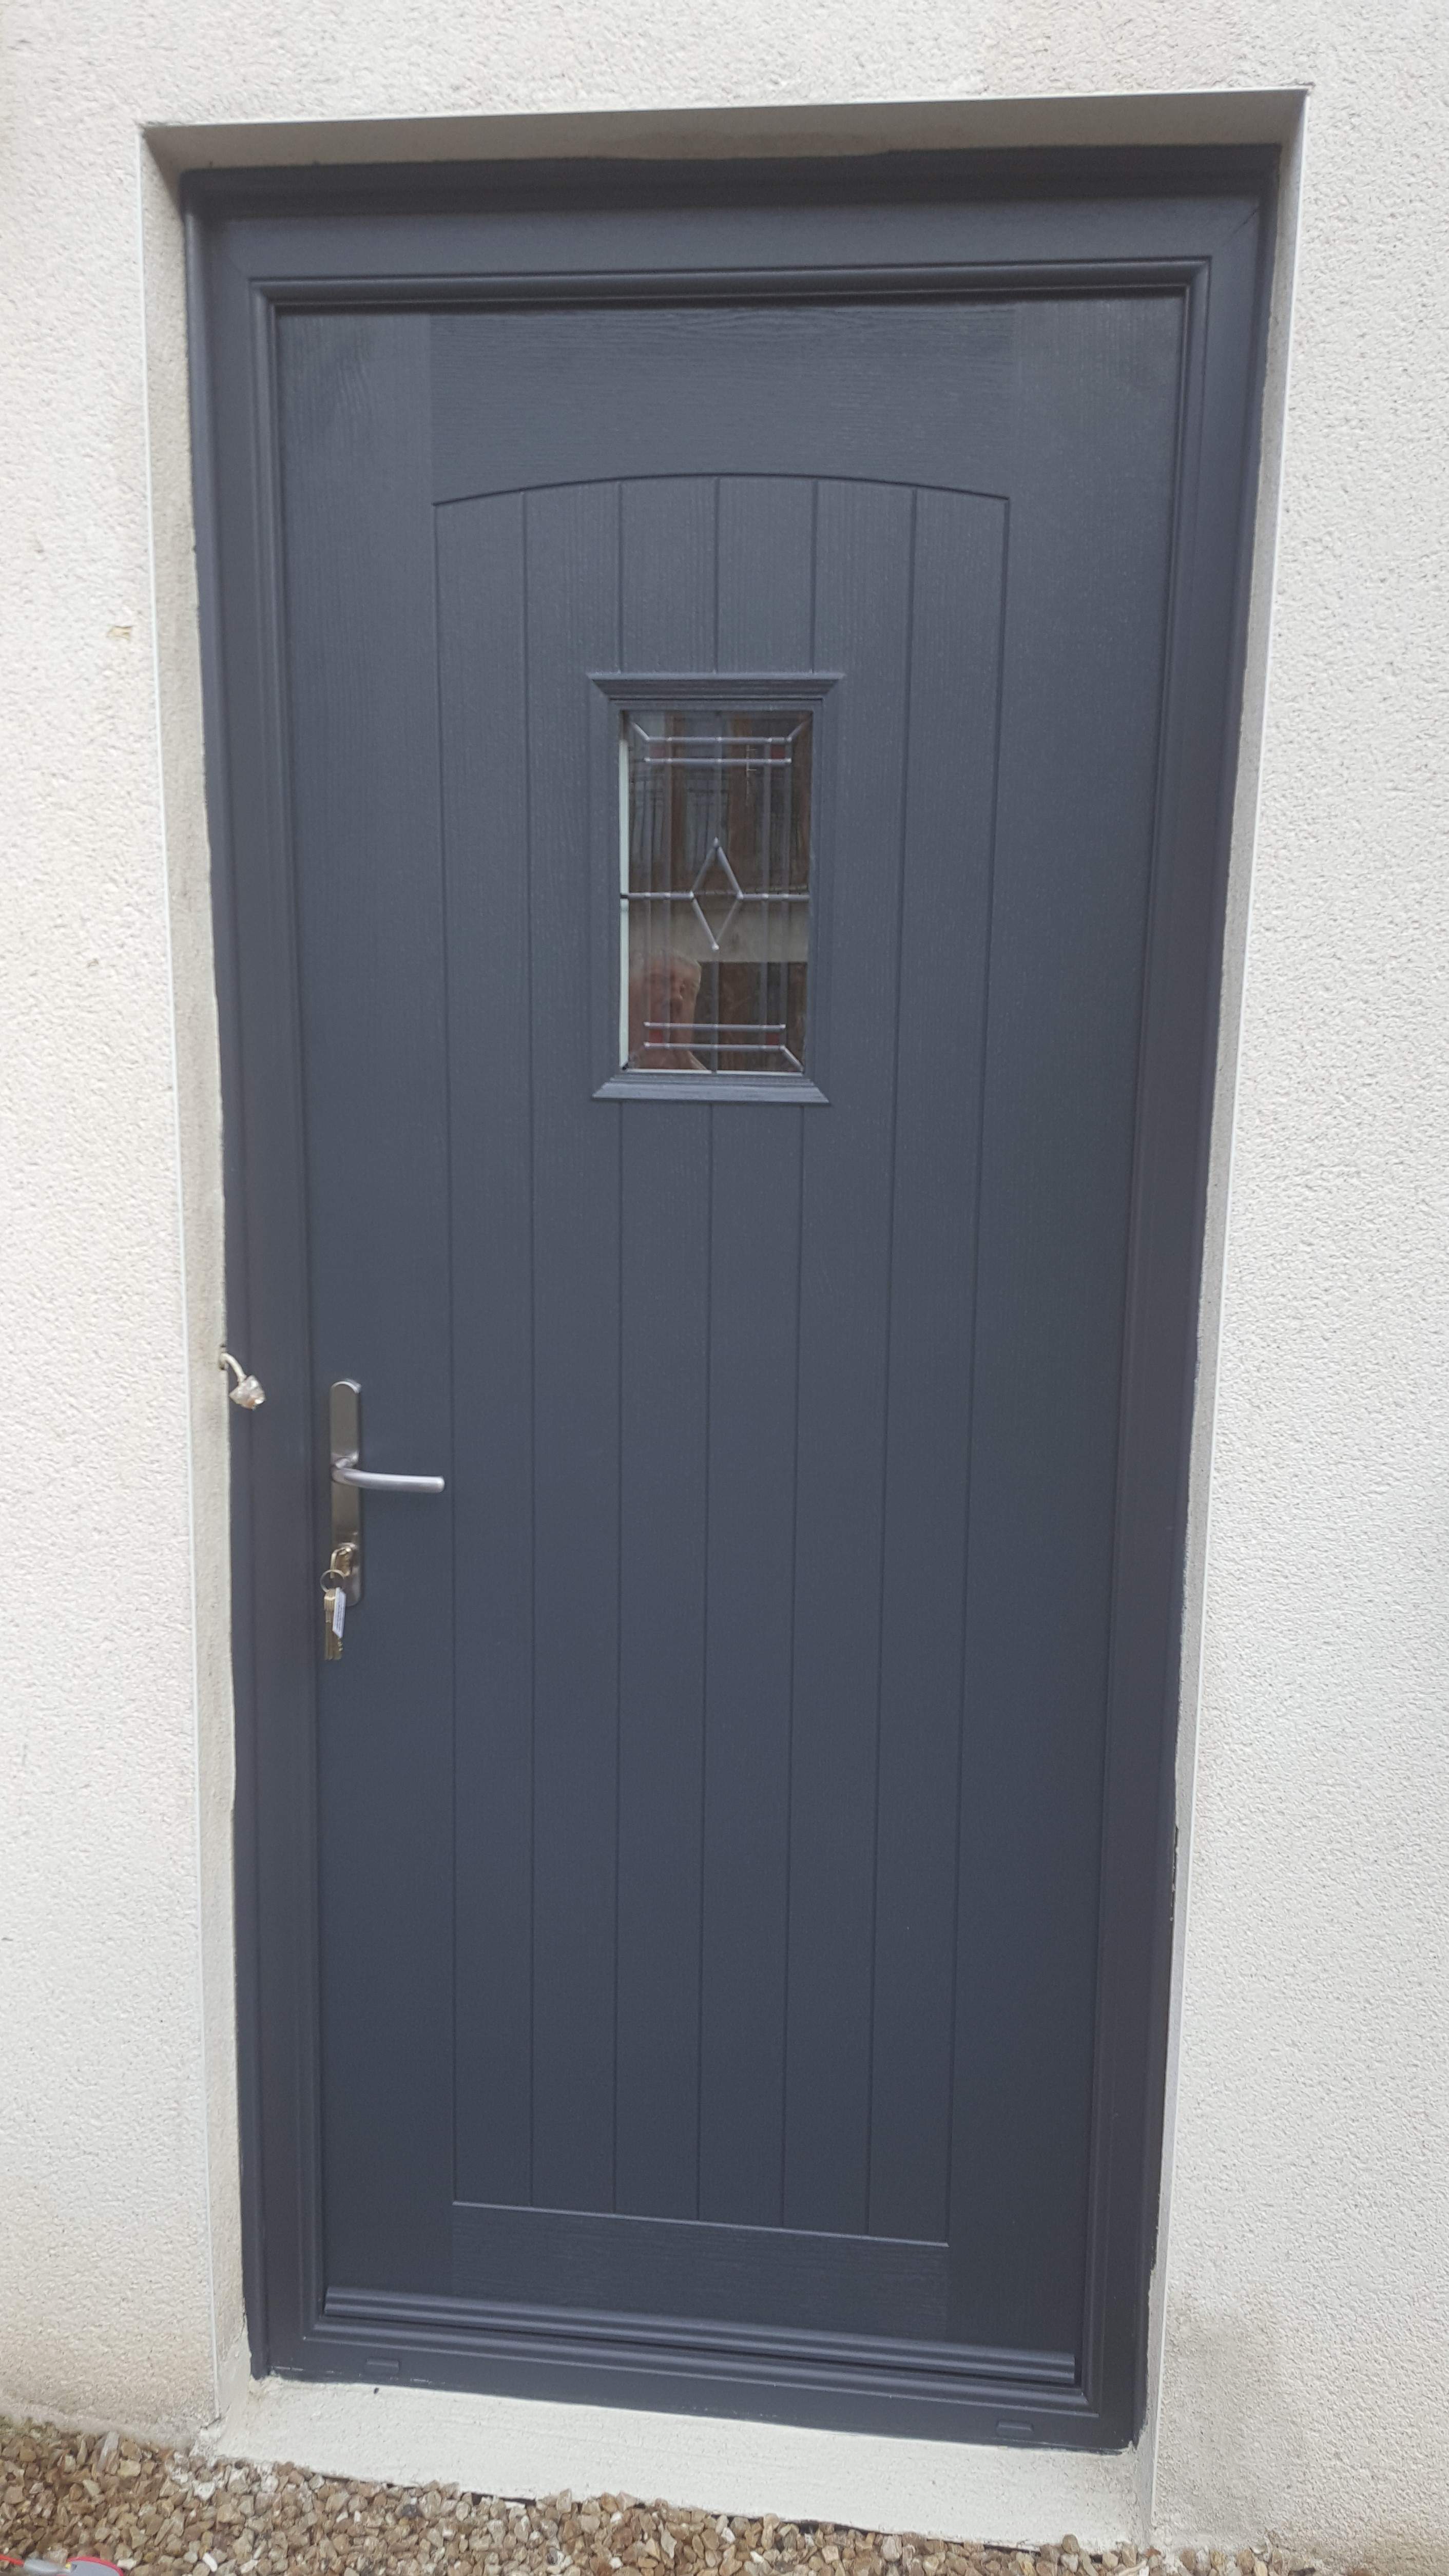 ANTHRACITE GREY APEER APY2 COMPOSITE FRONT DOOR FITTED BY ASGARD WINDOWS IN DUBLIN.